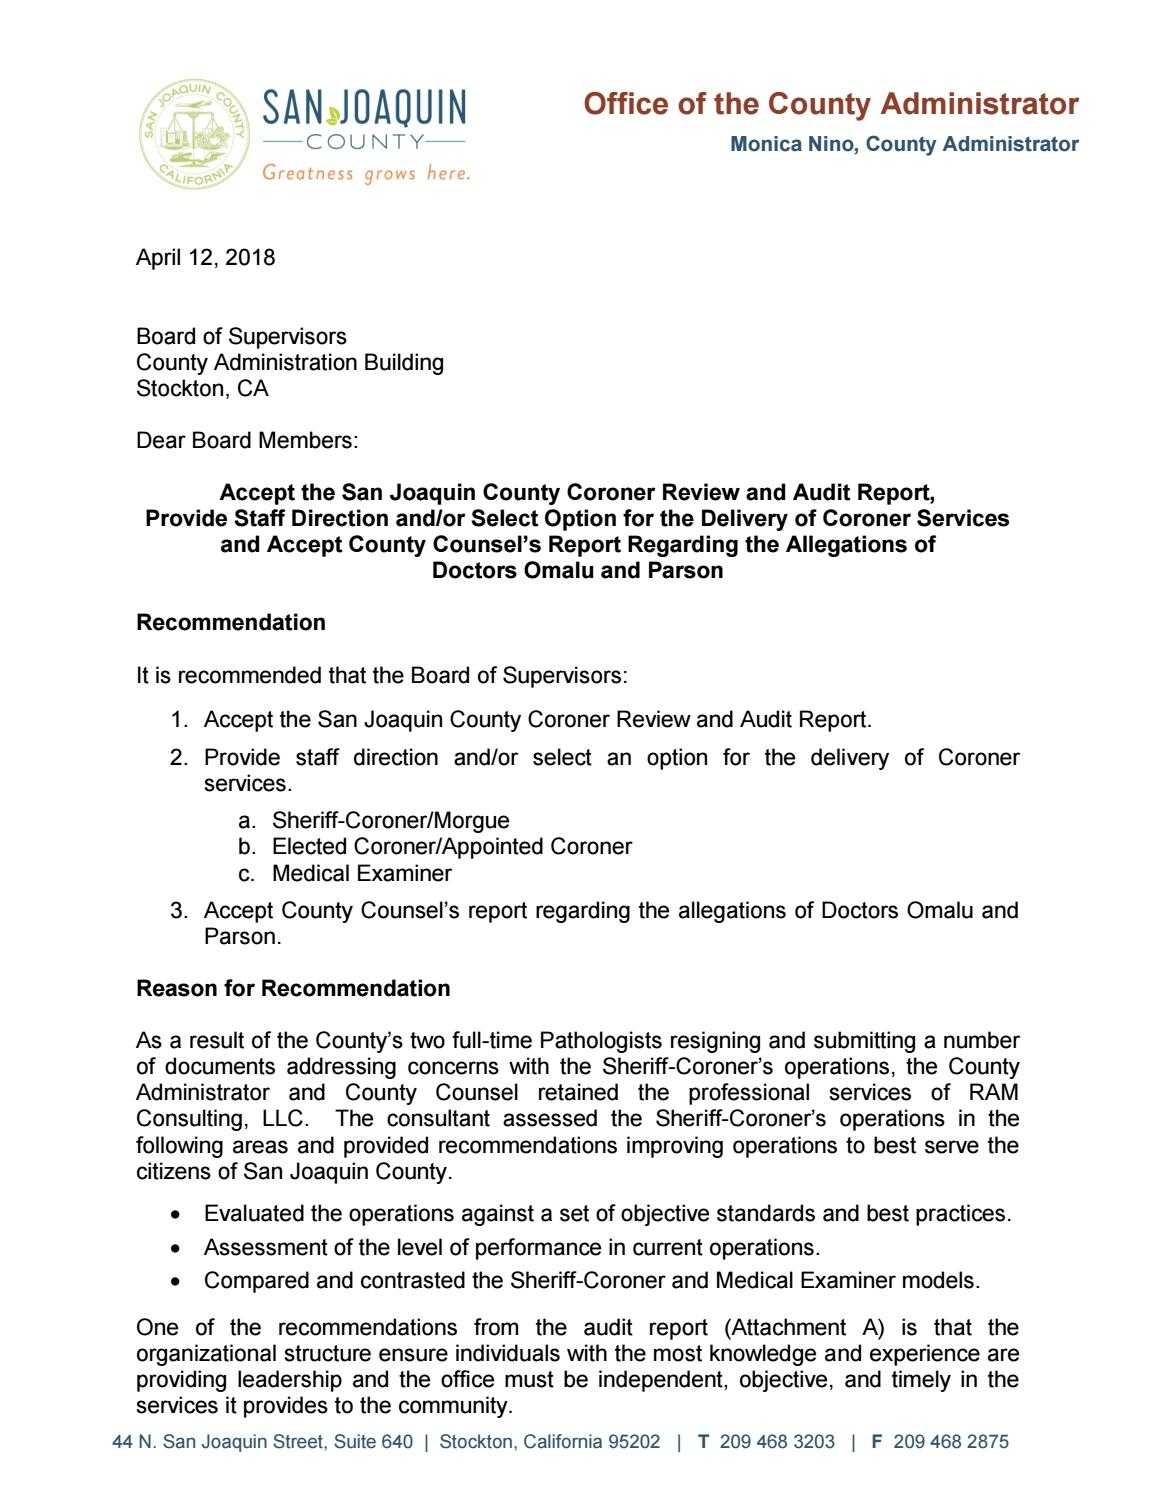 Administrator's Report On San Joaquin County Coroner's Throughout Coroner's Report Template